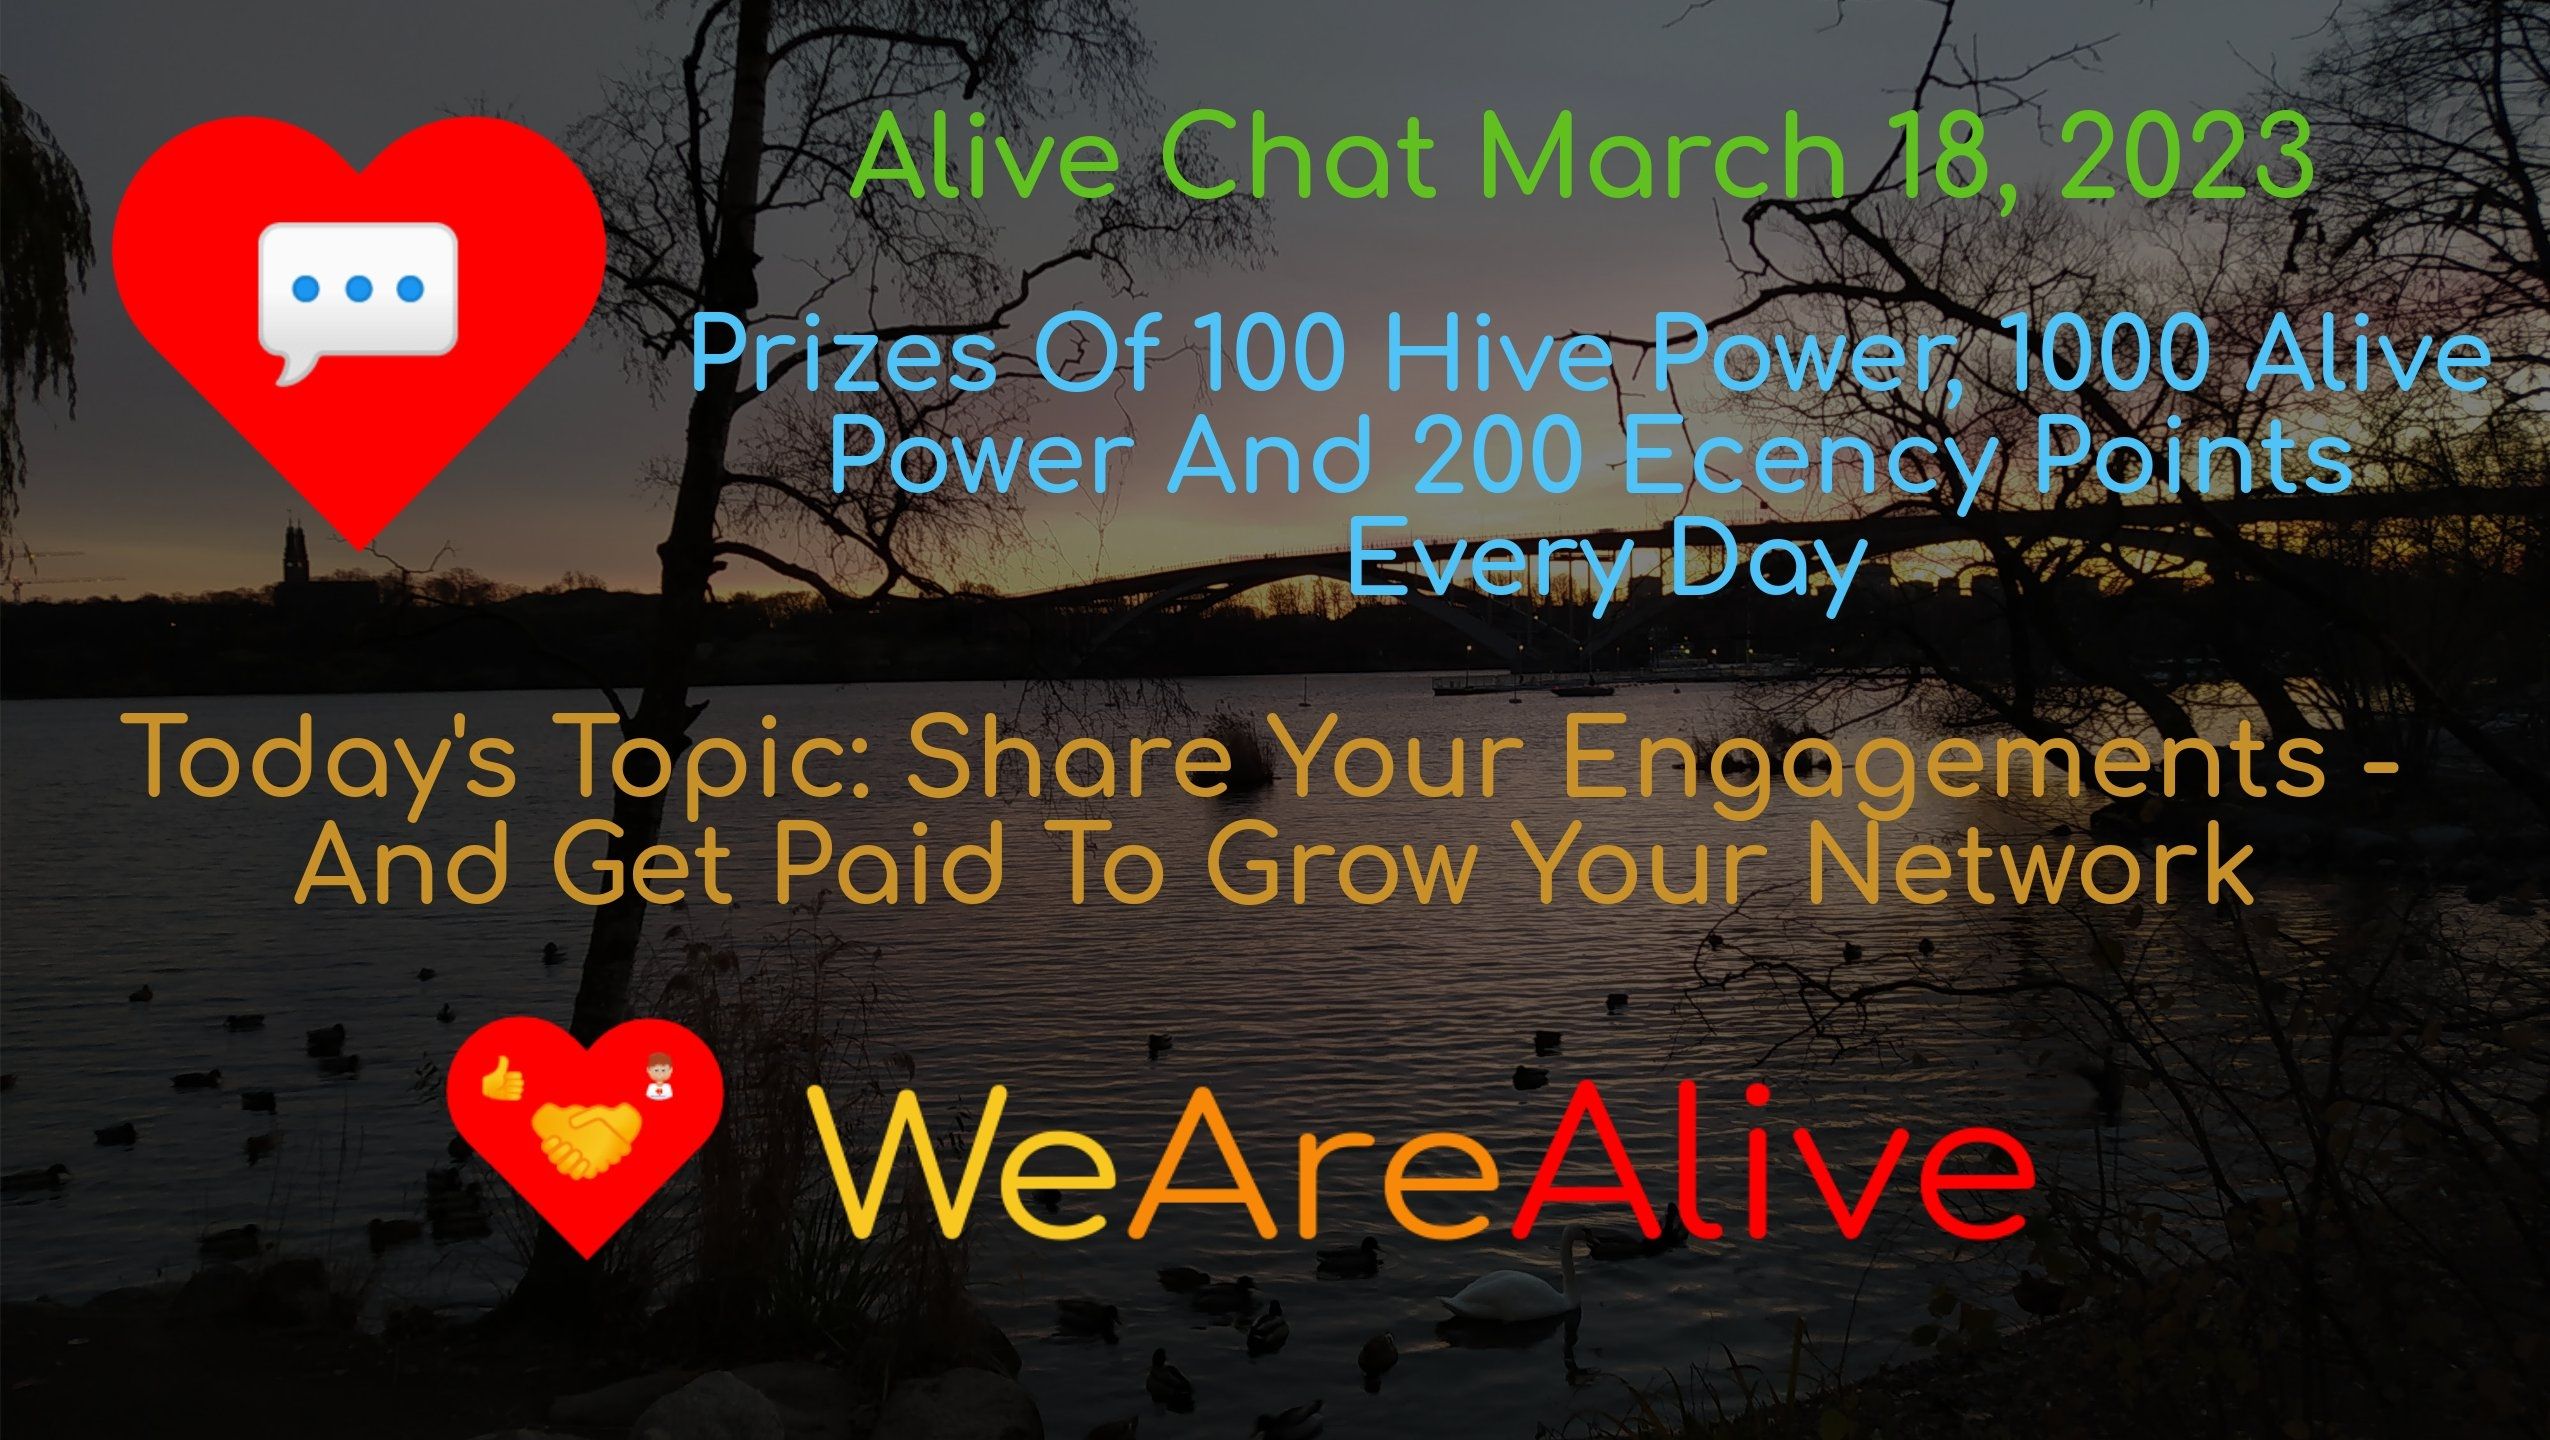 @alive.chat/alive-chat-march-18-2023